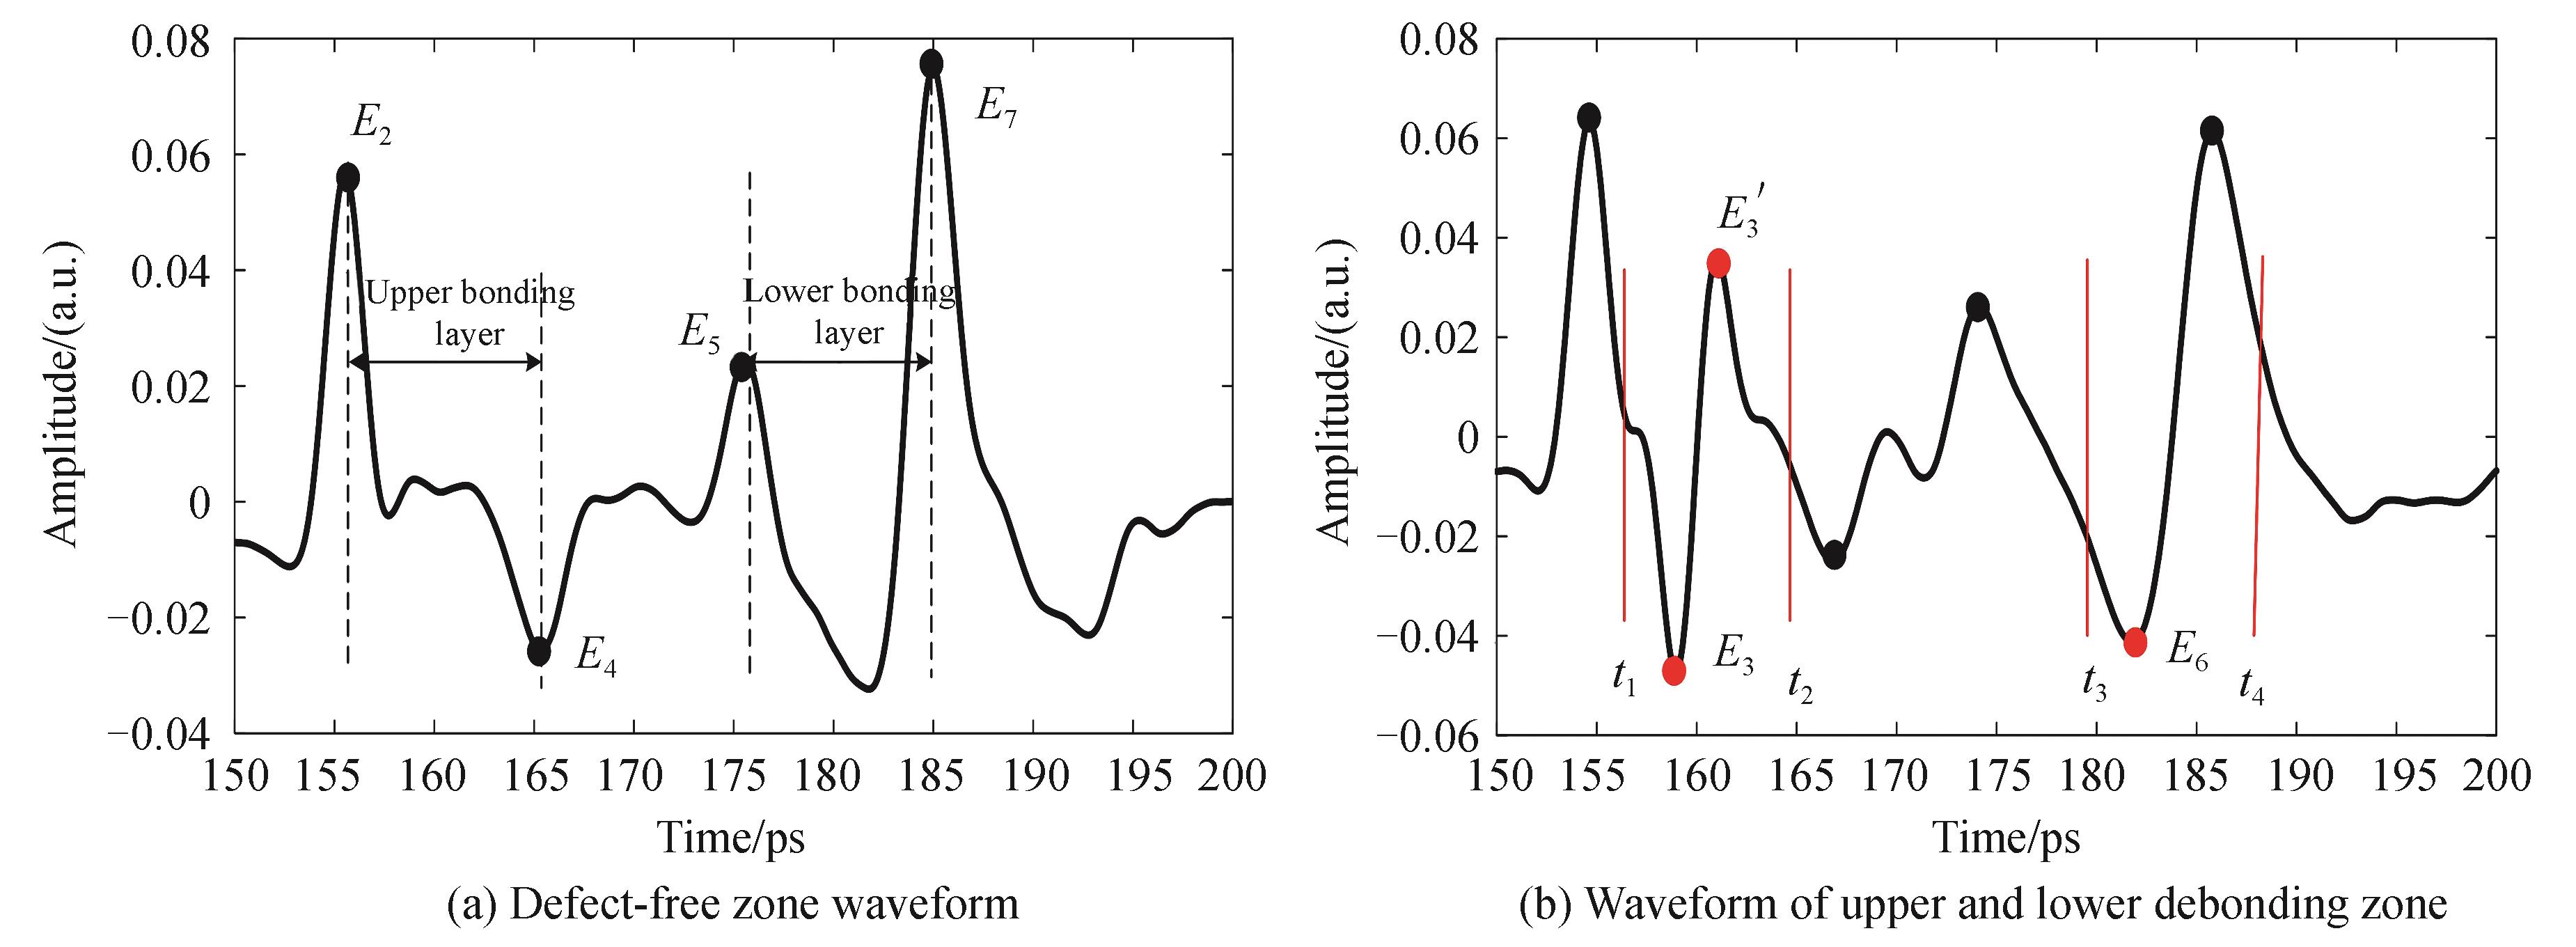 Terahertz time domain waveforms of different defect areas